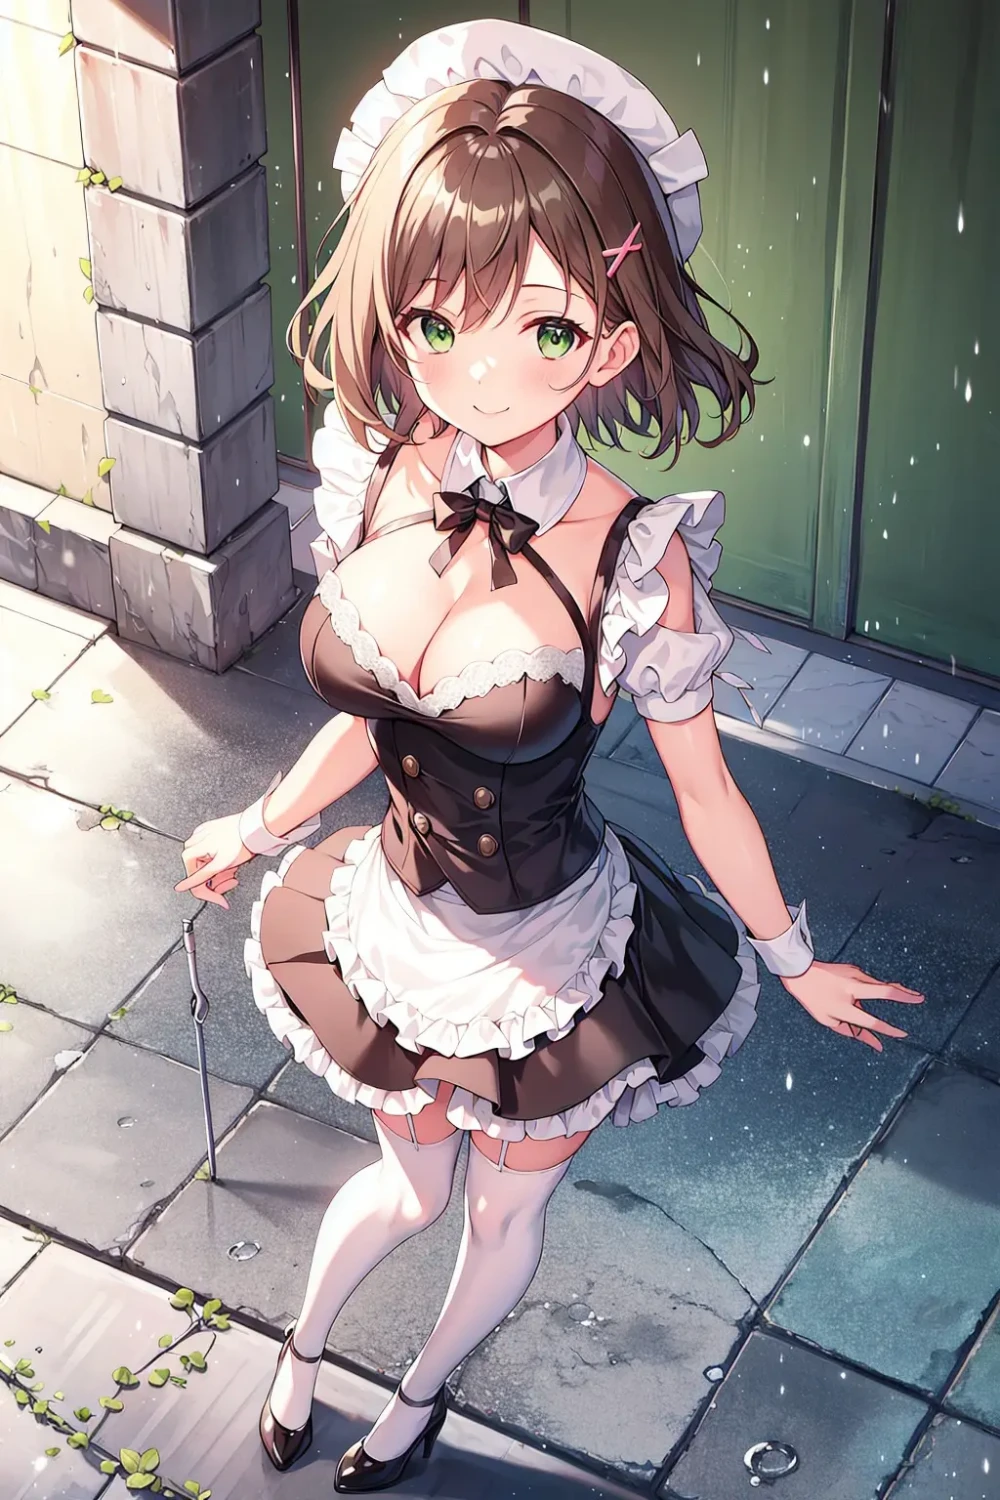 maid-anime-style-all-ages-23